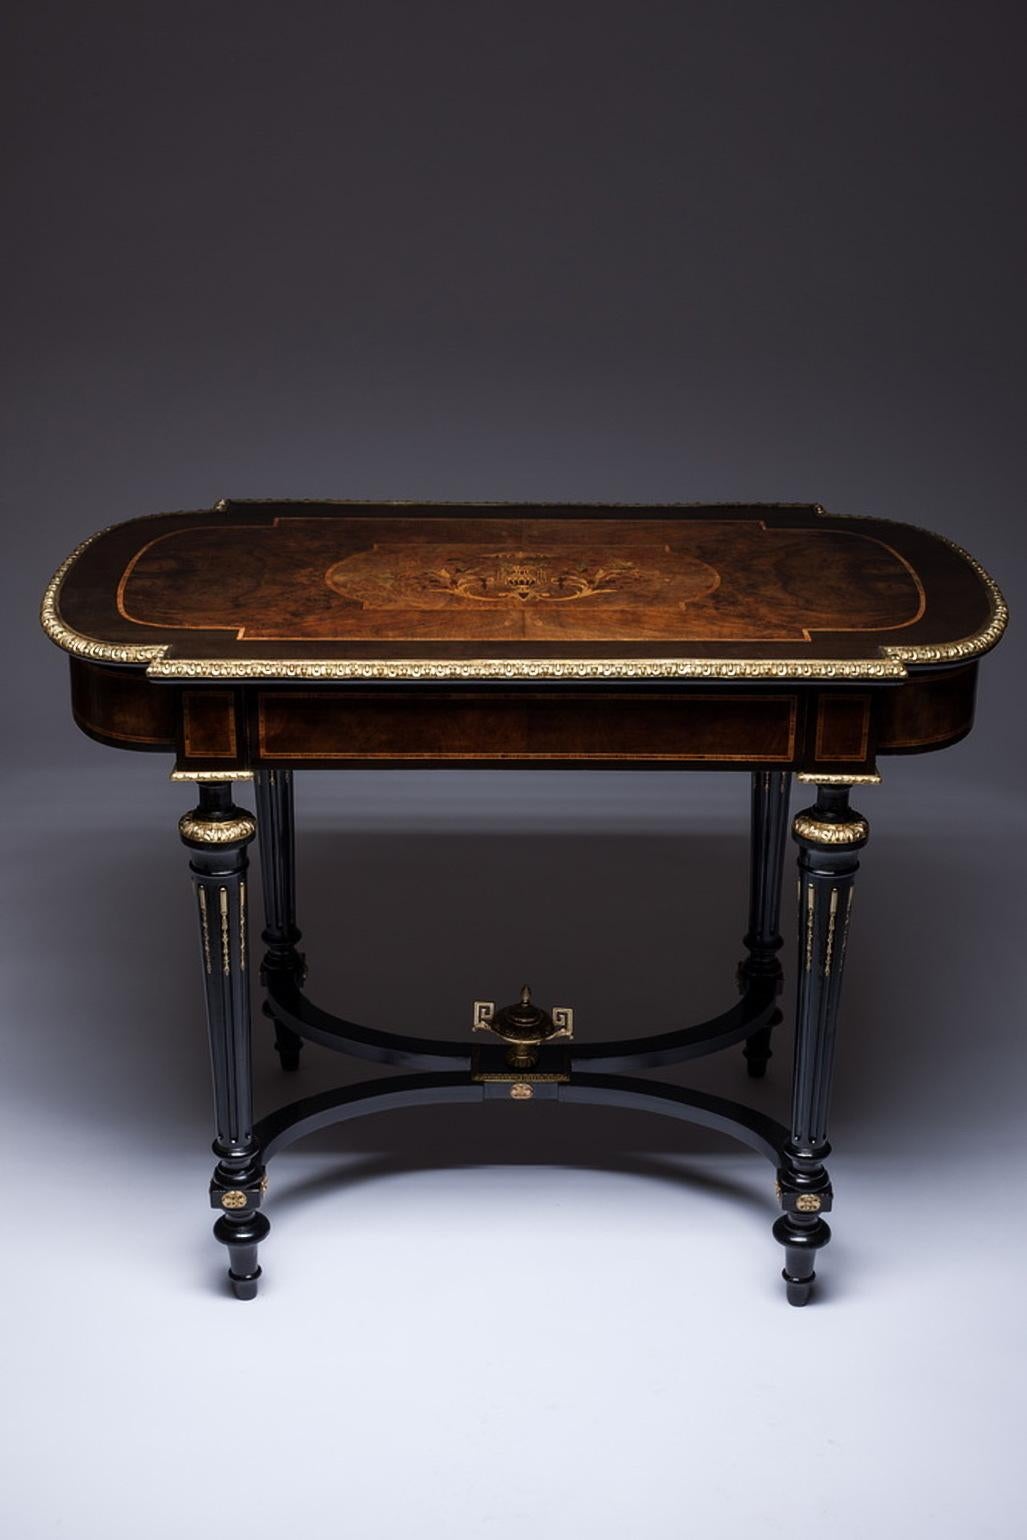 A fine French 19th century Louis XVI style ebonized gilt bronze-mounted tulipwood, kingwood and fruitwood floral marquetry single-drawer center table, desk or writing table. The ornately decorated marquetry top, centred with a floral bouquet,